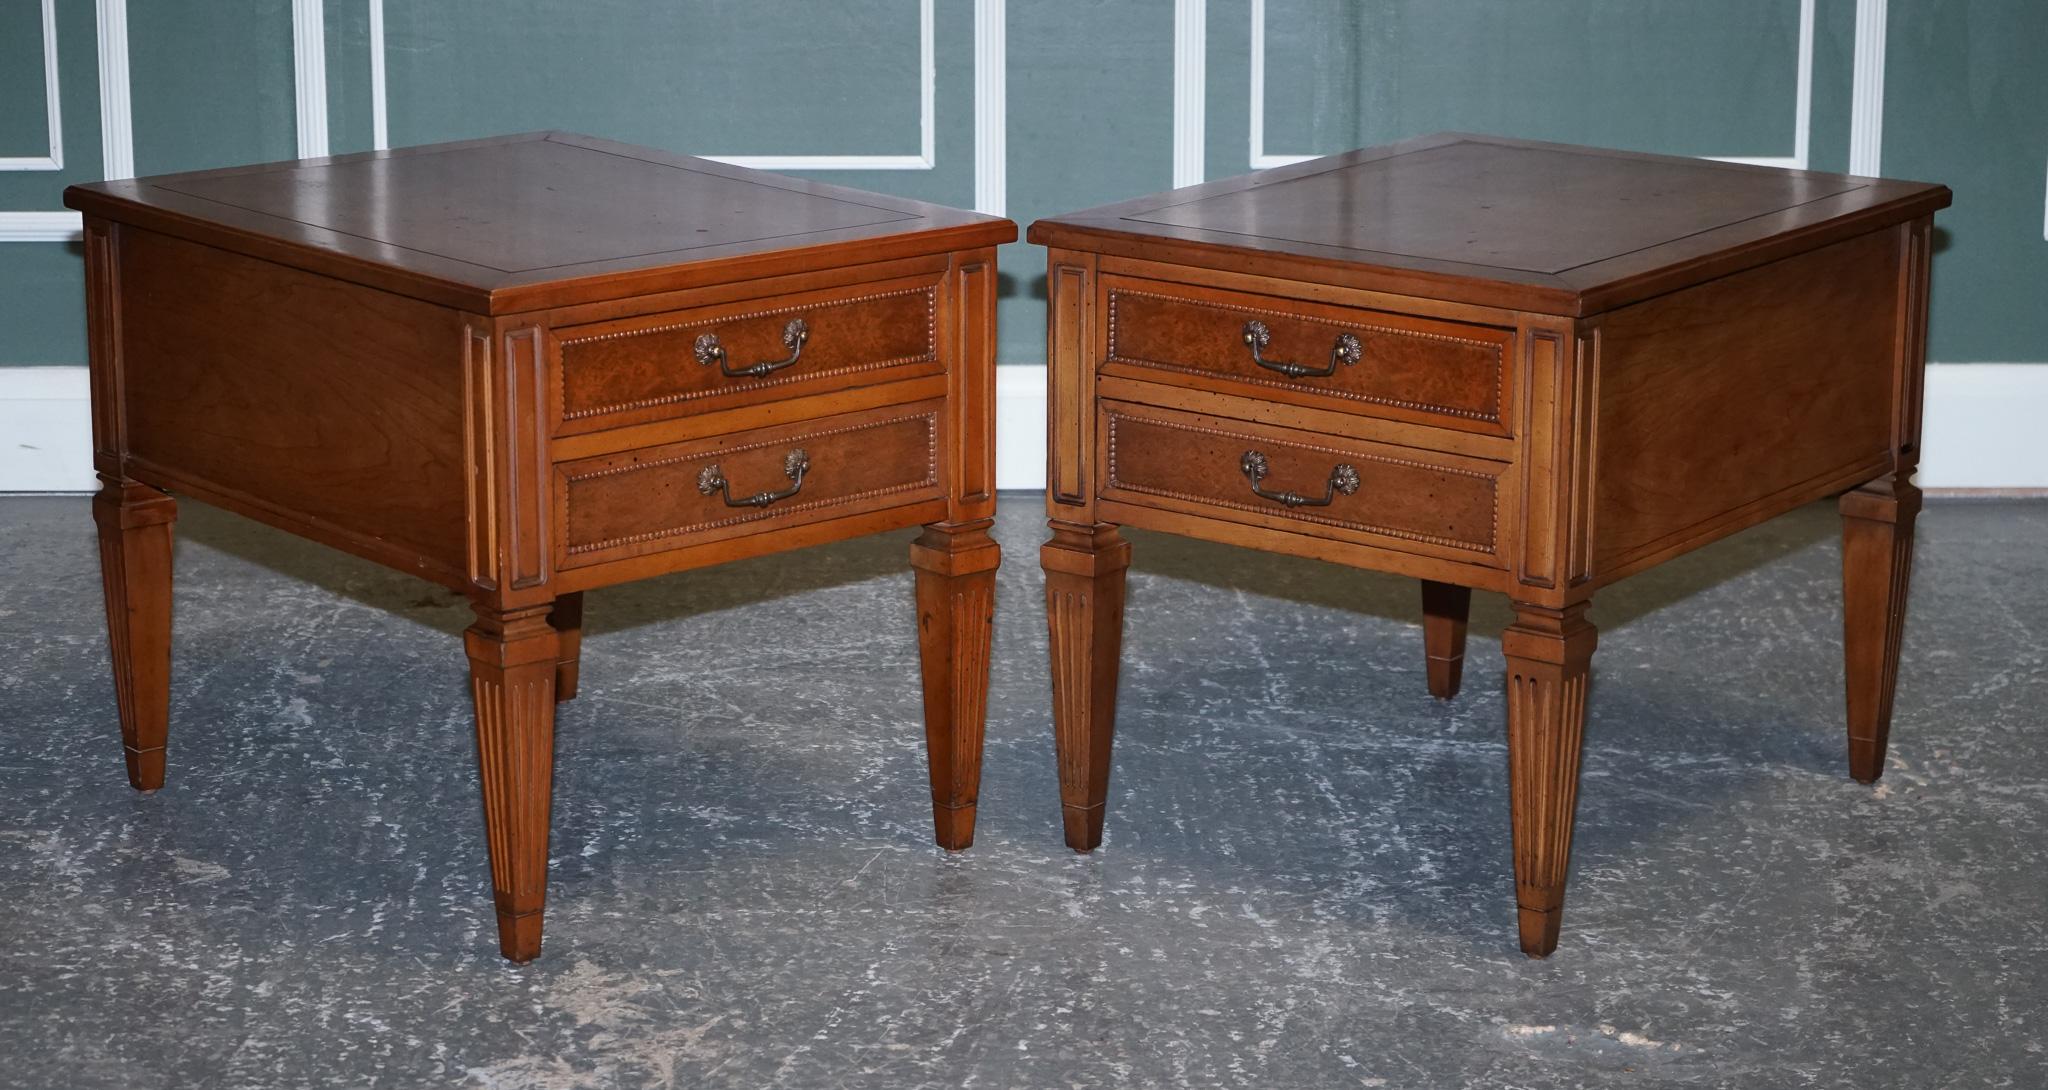 We are delighted to Present This Pair Of Walnut Bedside Tables.

They are made by Hammary which is an American-based company.
The front drawers have this beautiful burr on the wood, with original handles to open all drawers.
Also, the legs are